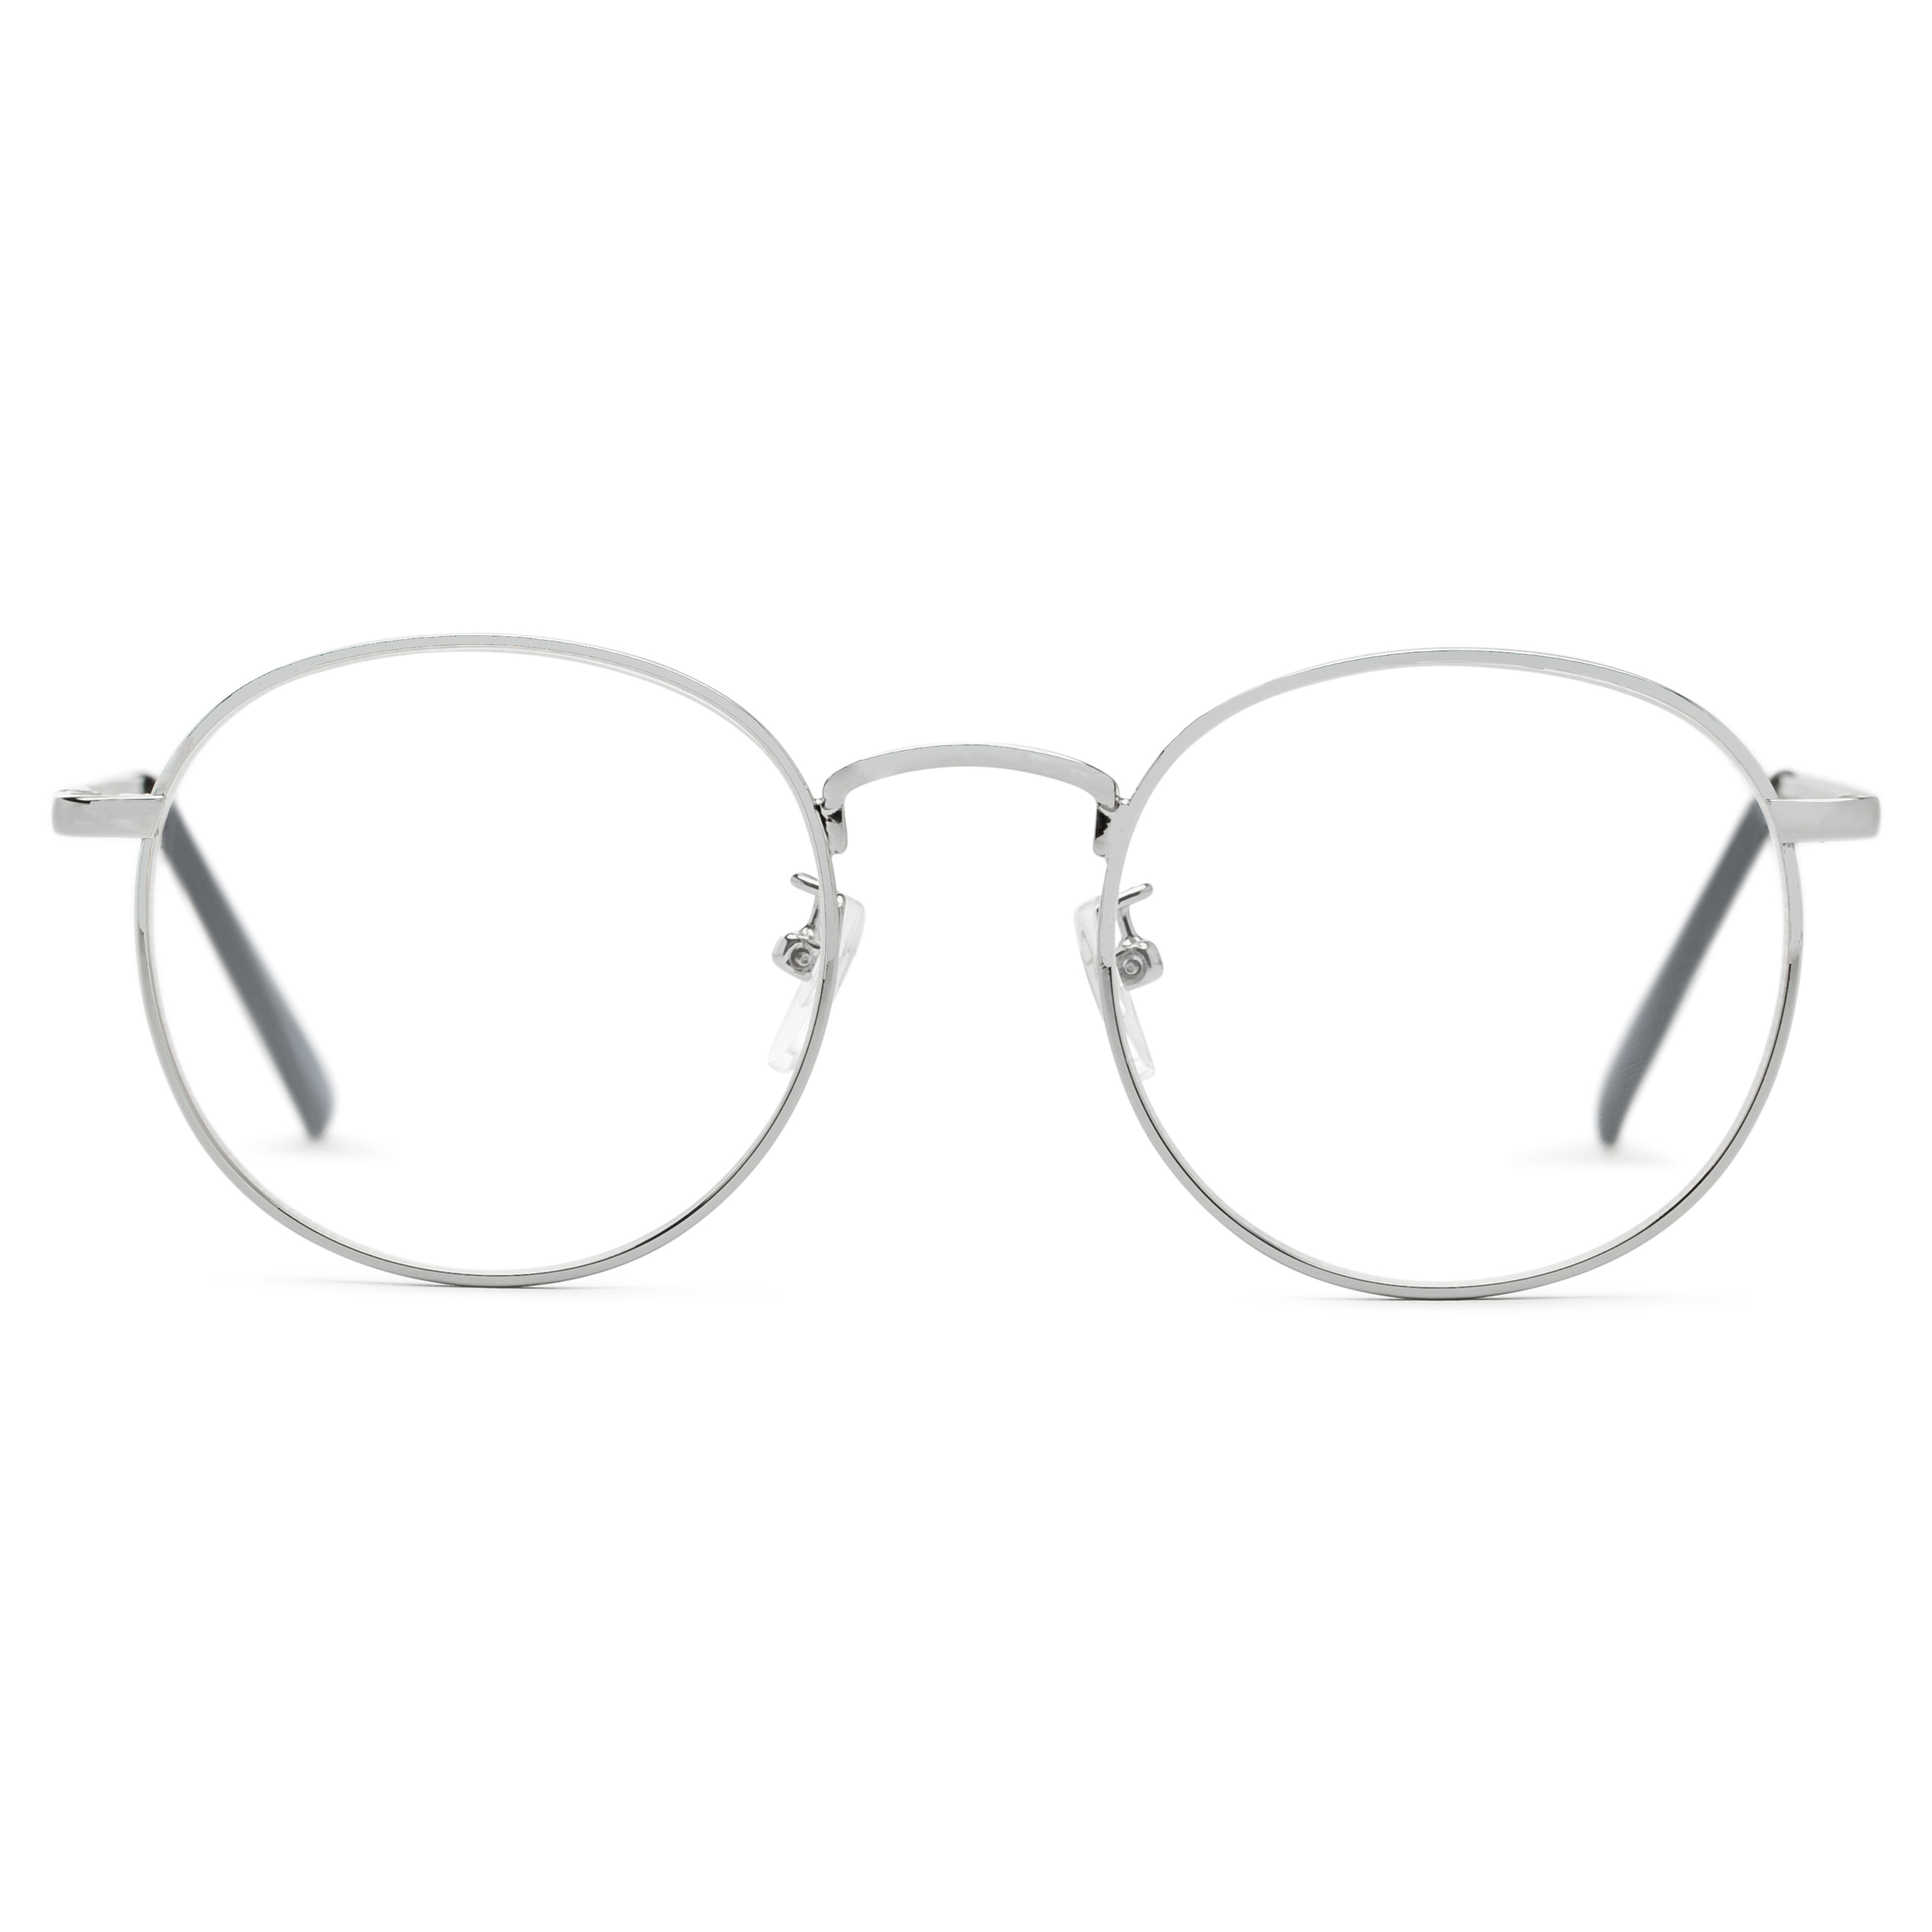 Men's Round Reading Glasses In Silver By Foster Grant - Rowland - +1.50